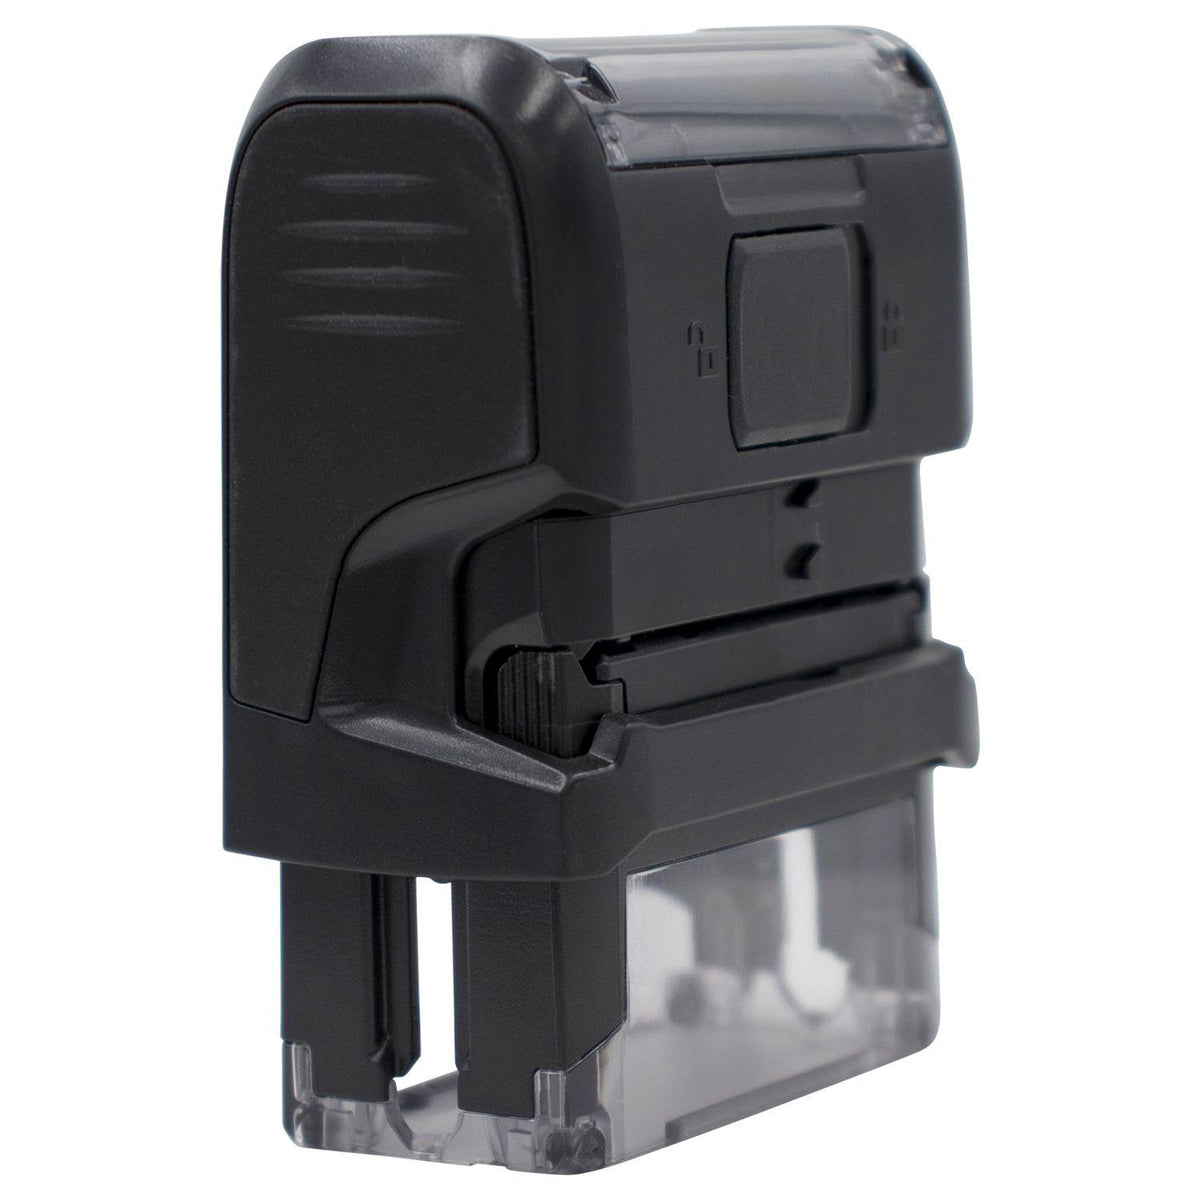 Large Self Inking 100 Stamp Back View